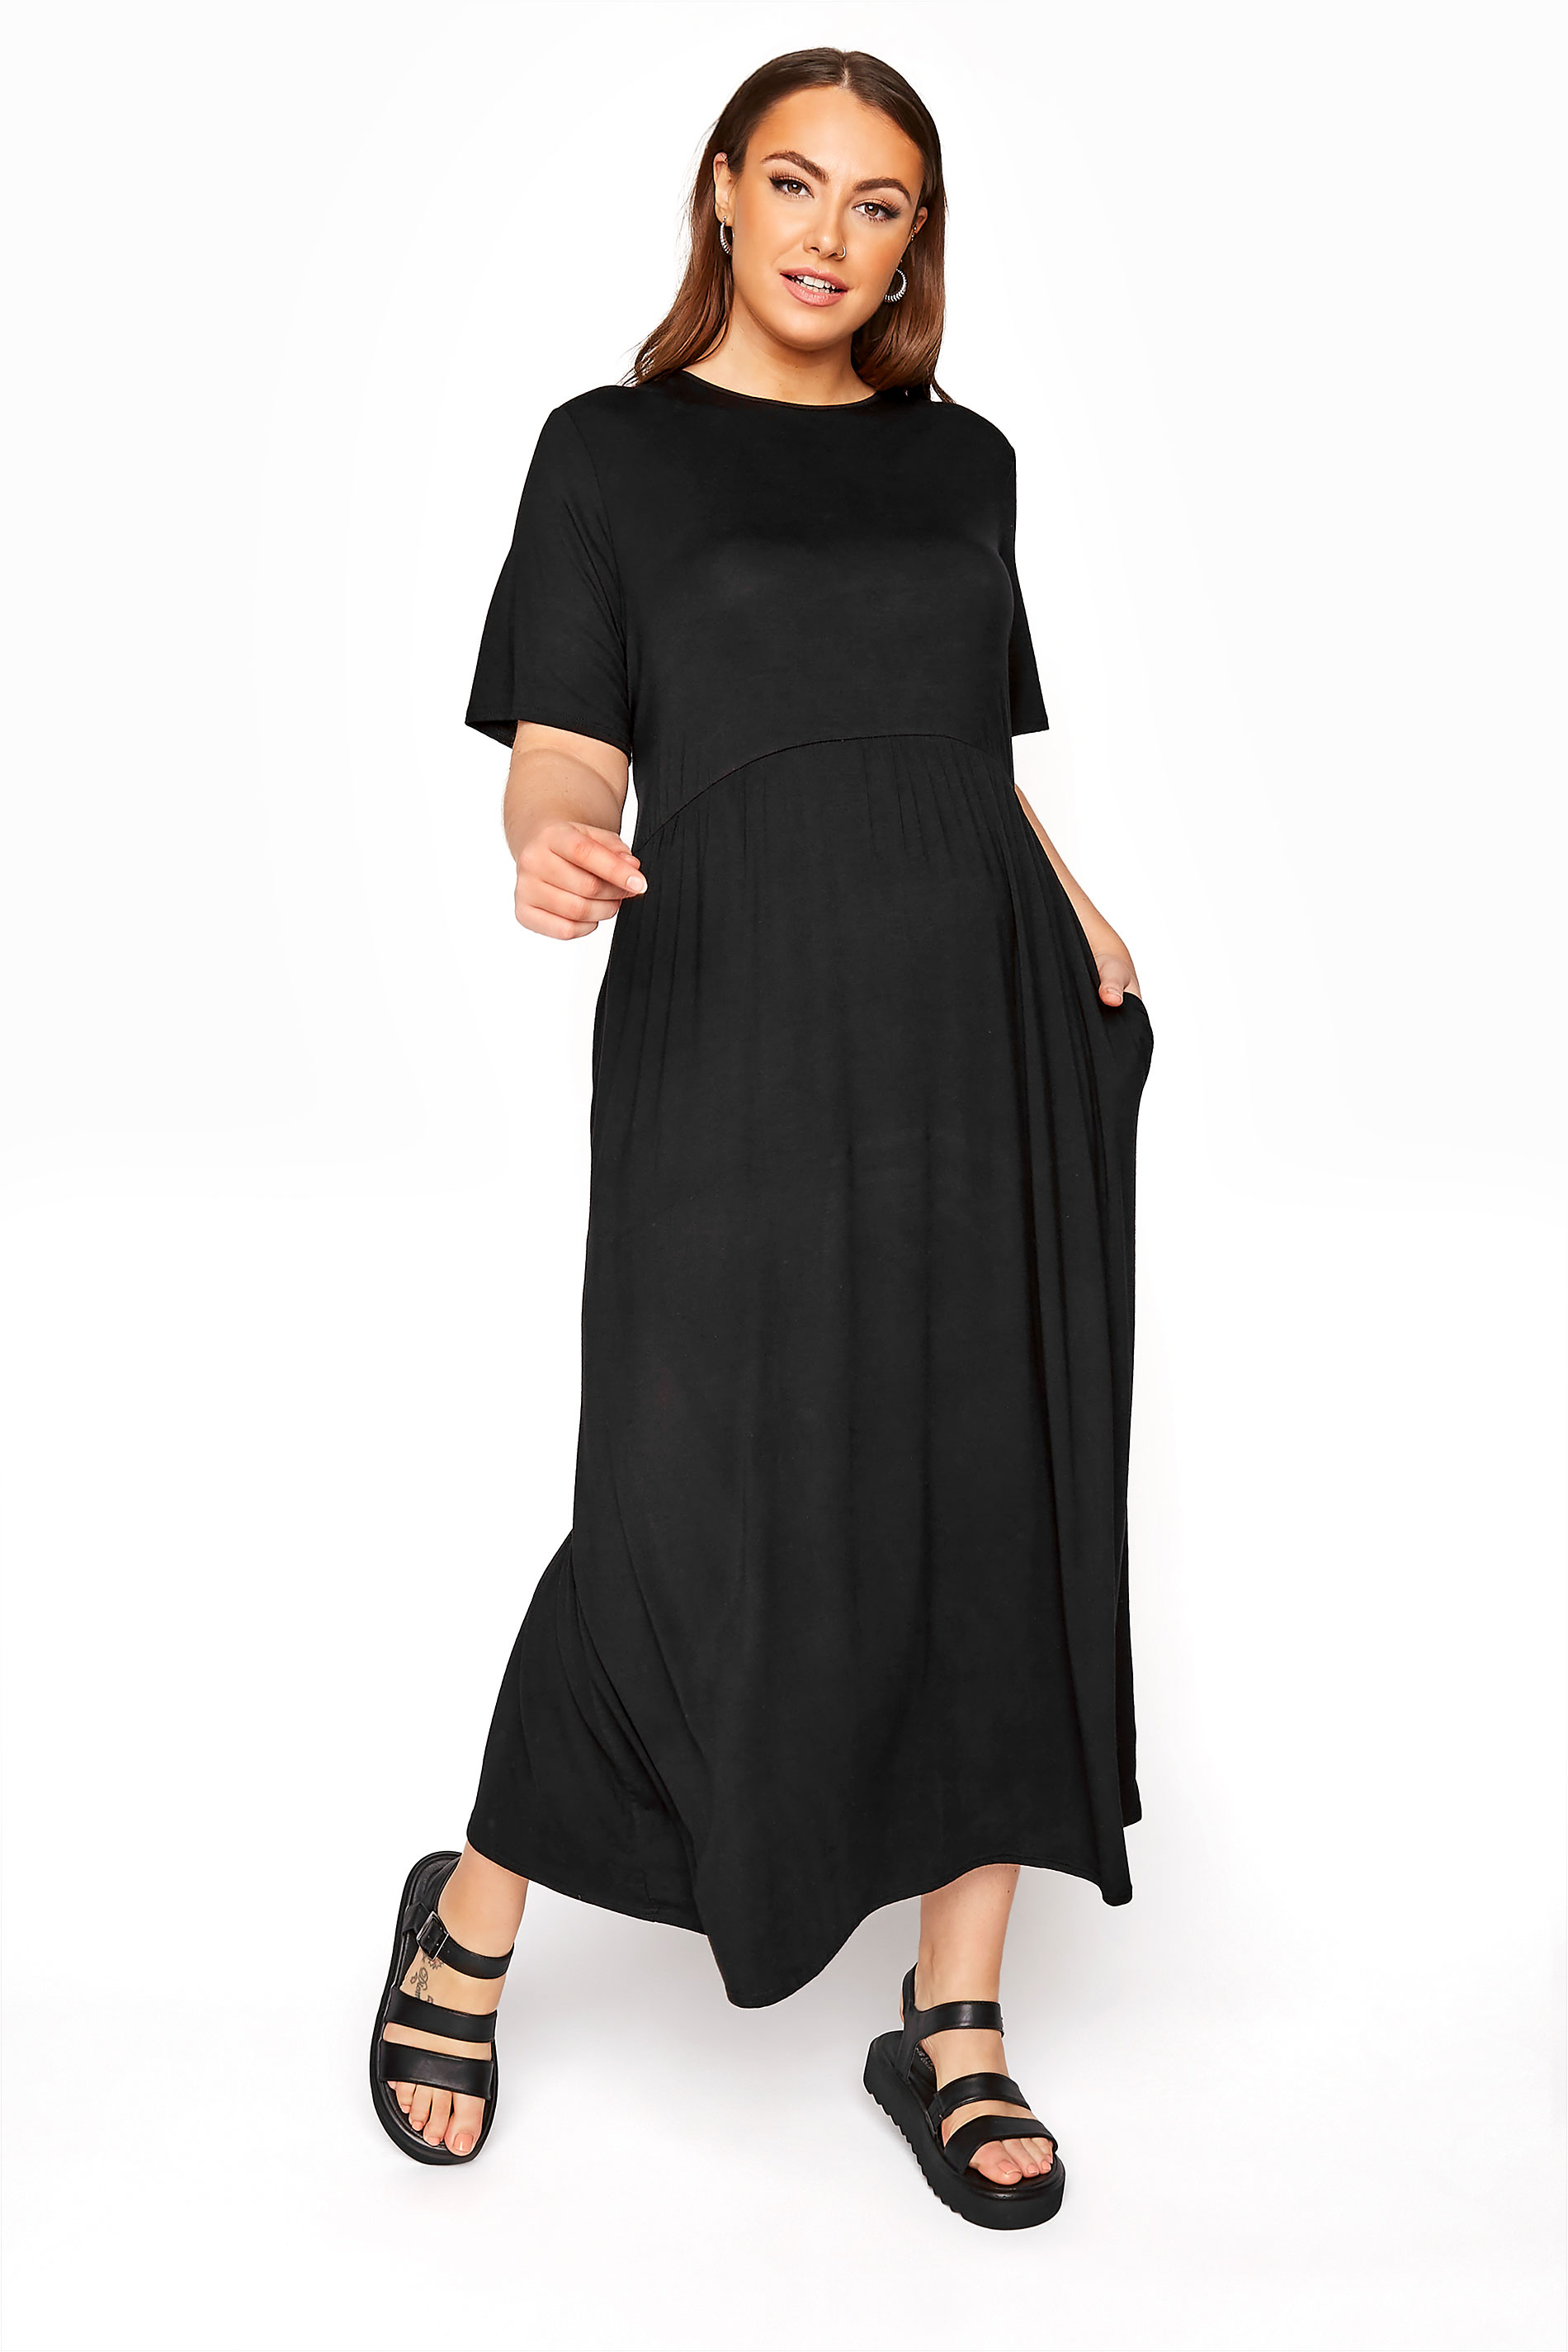 LIMITED COLLECTION Curve Black Throw On Maxi Dress_A.jpg